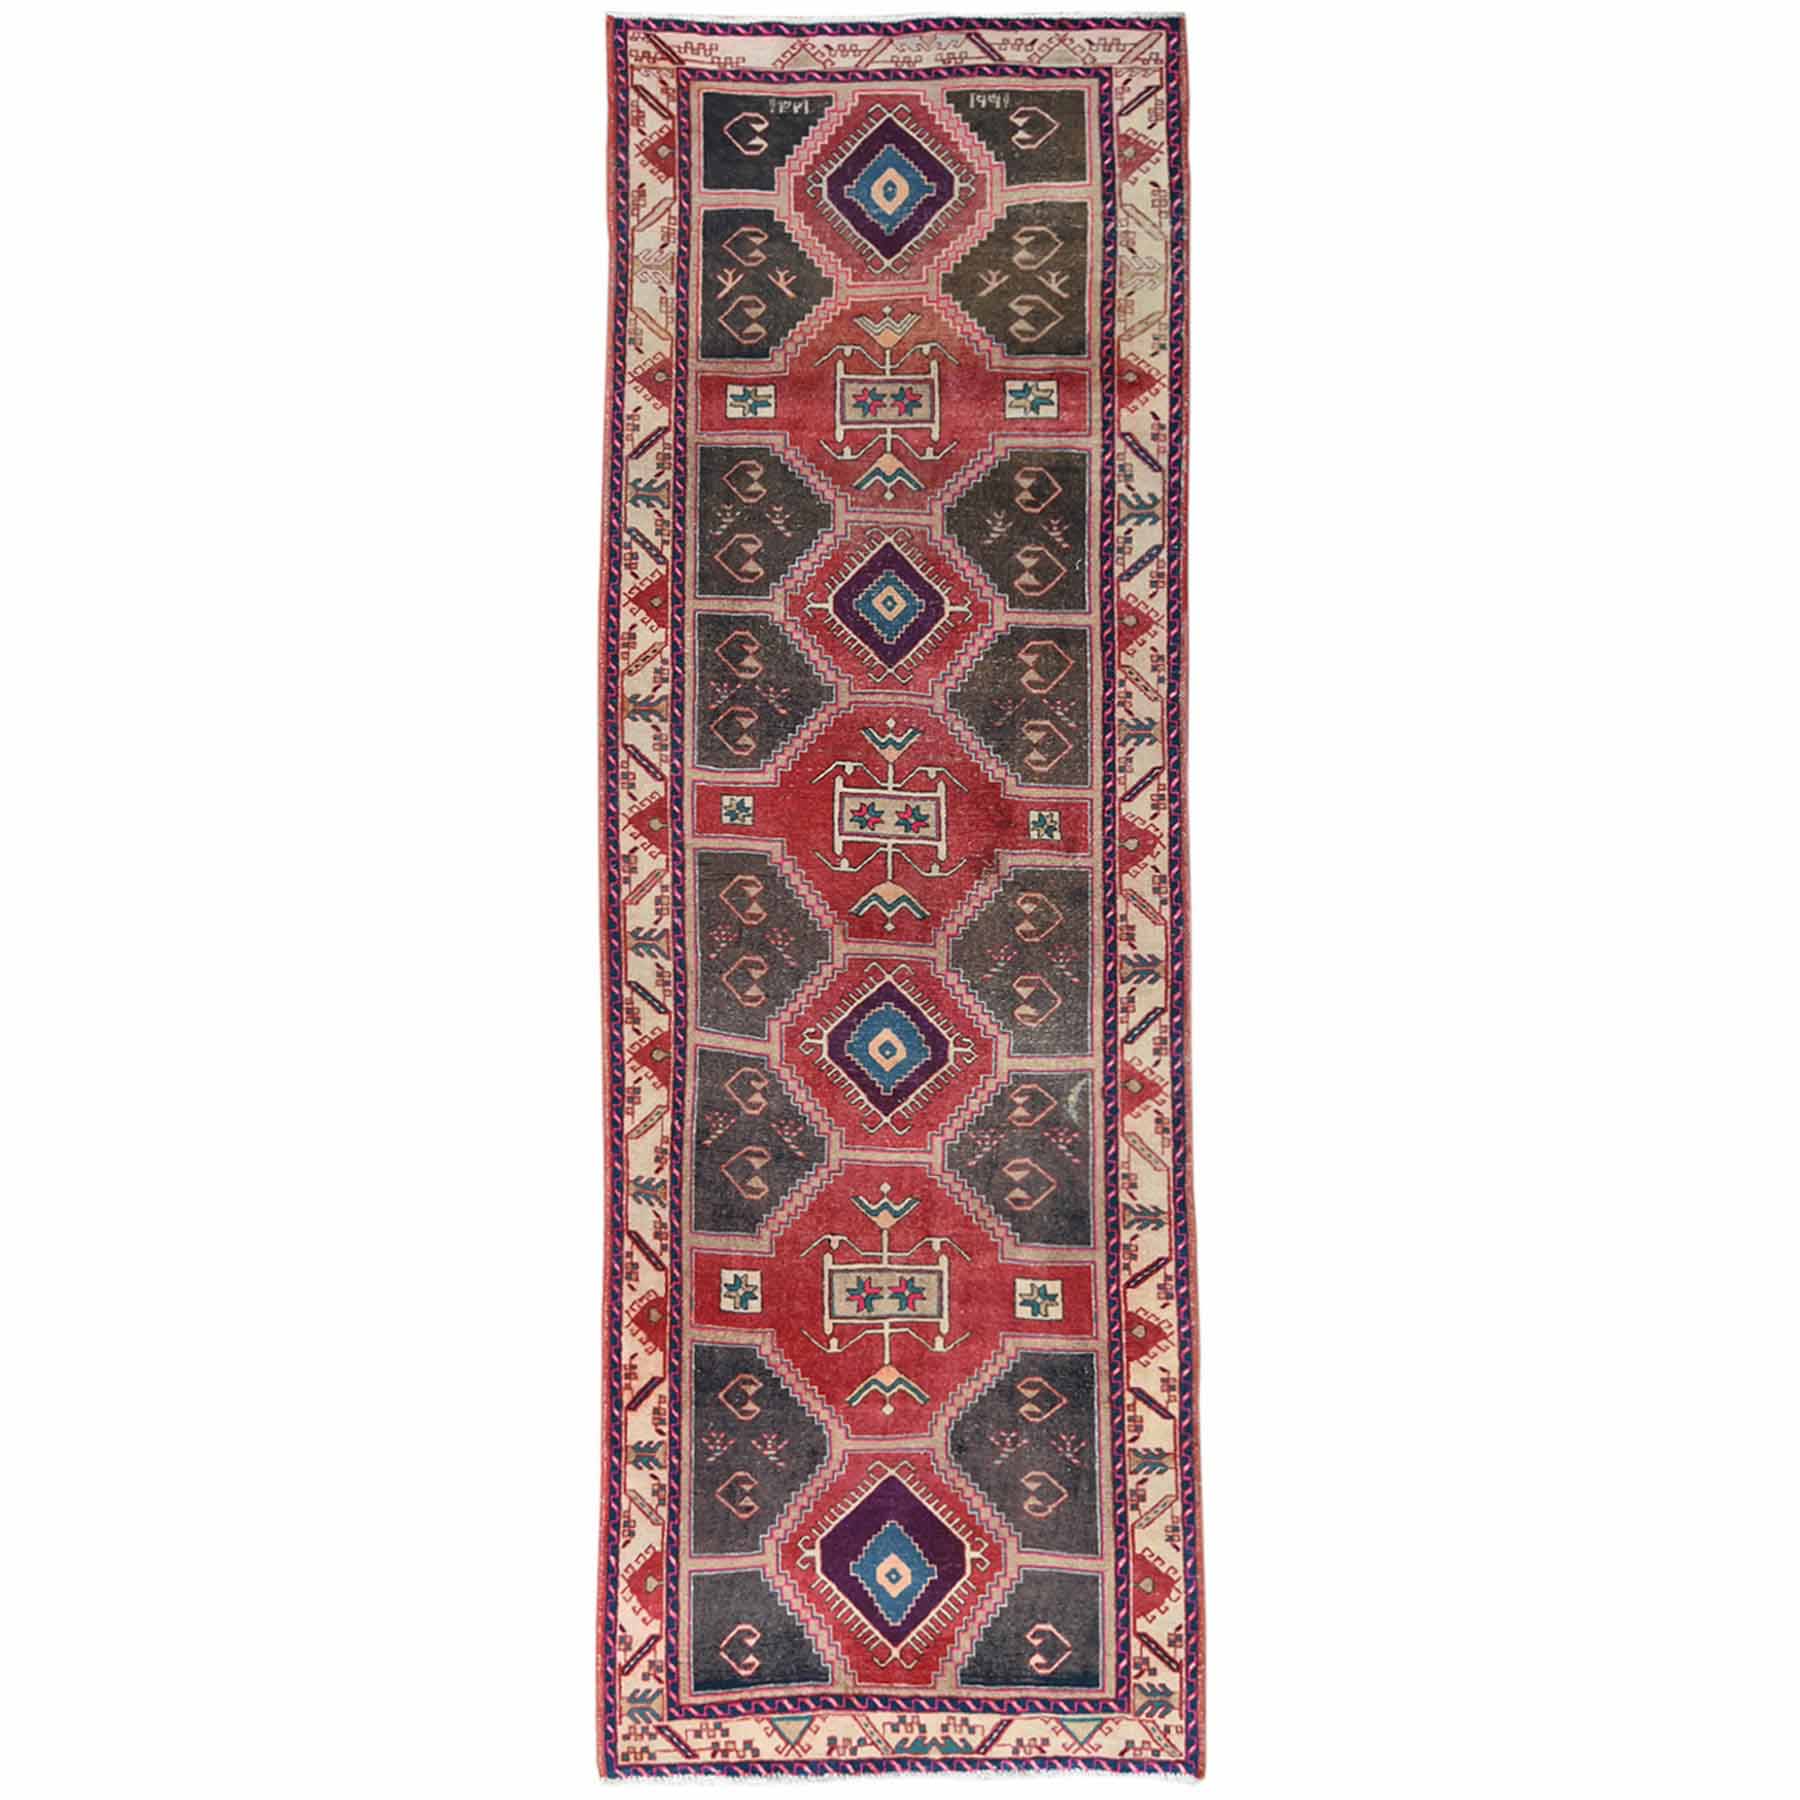 Overdyed-Vintage-Hand-Knotted-Rug-302550